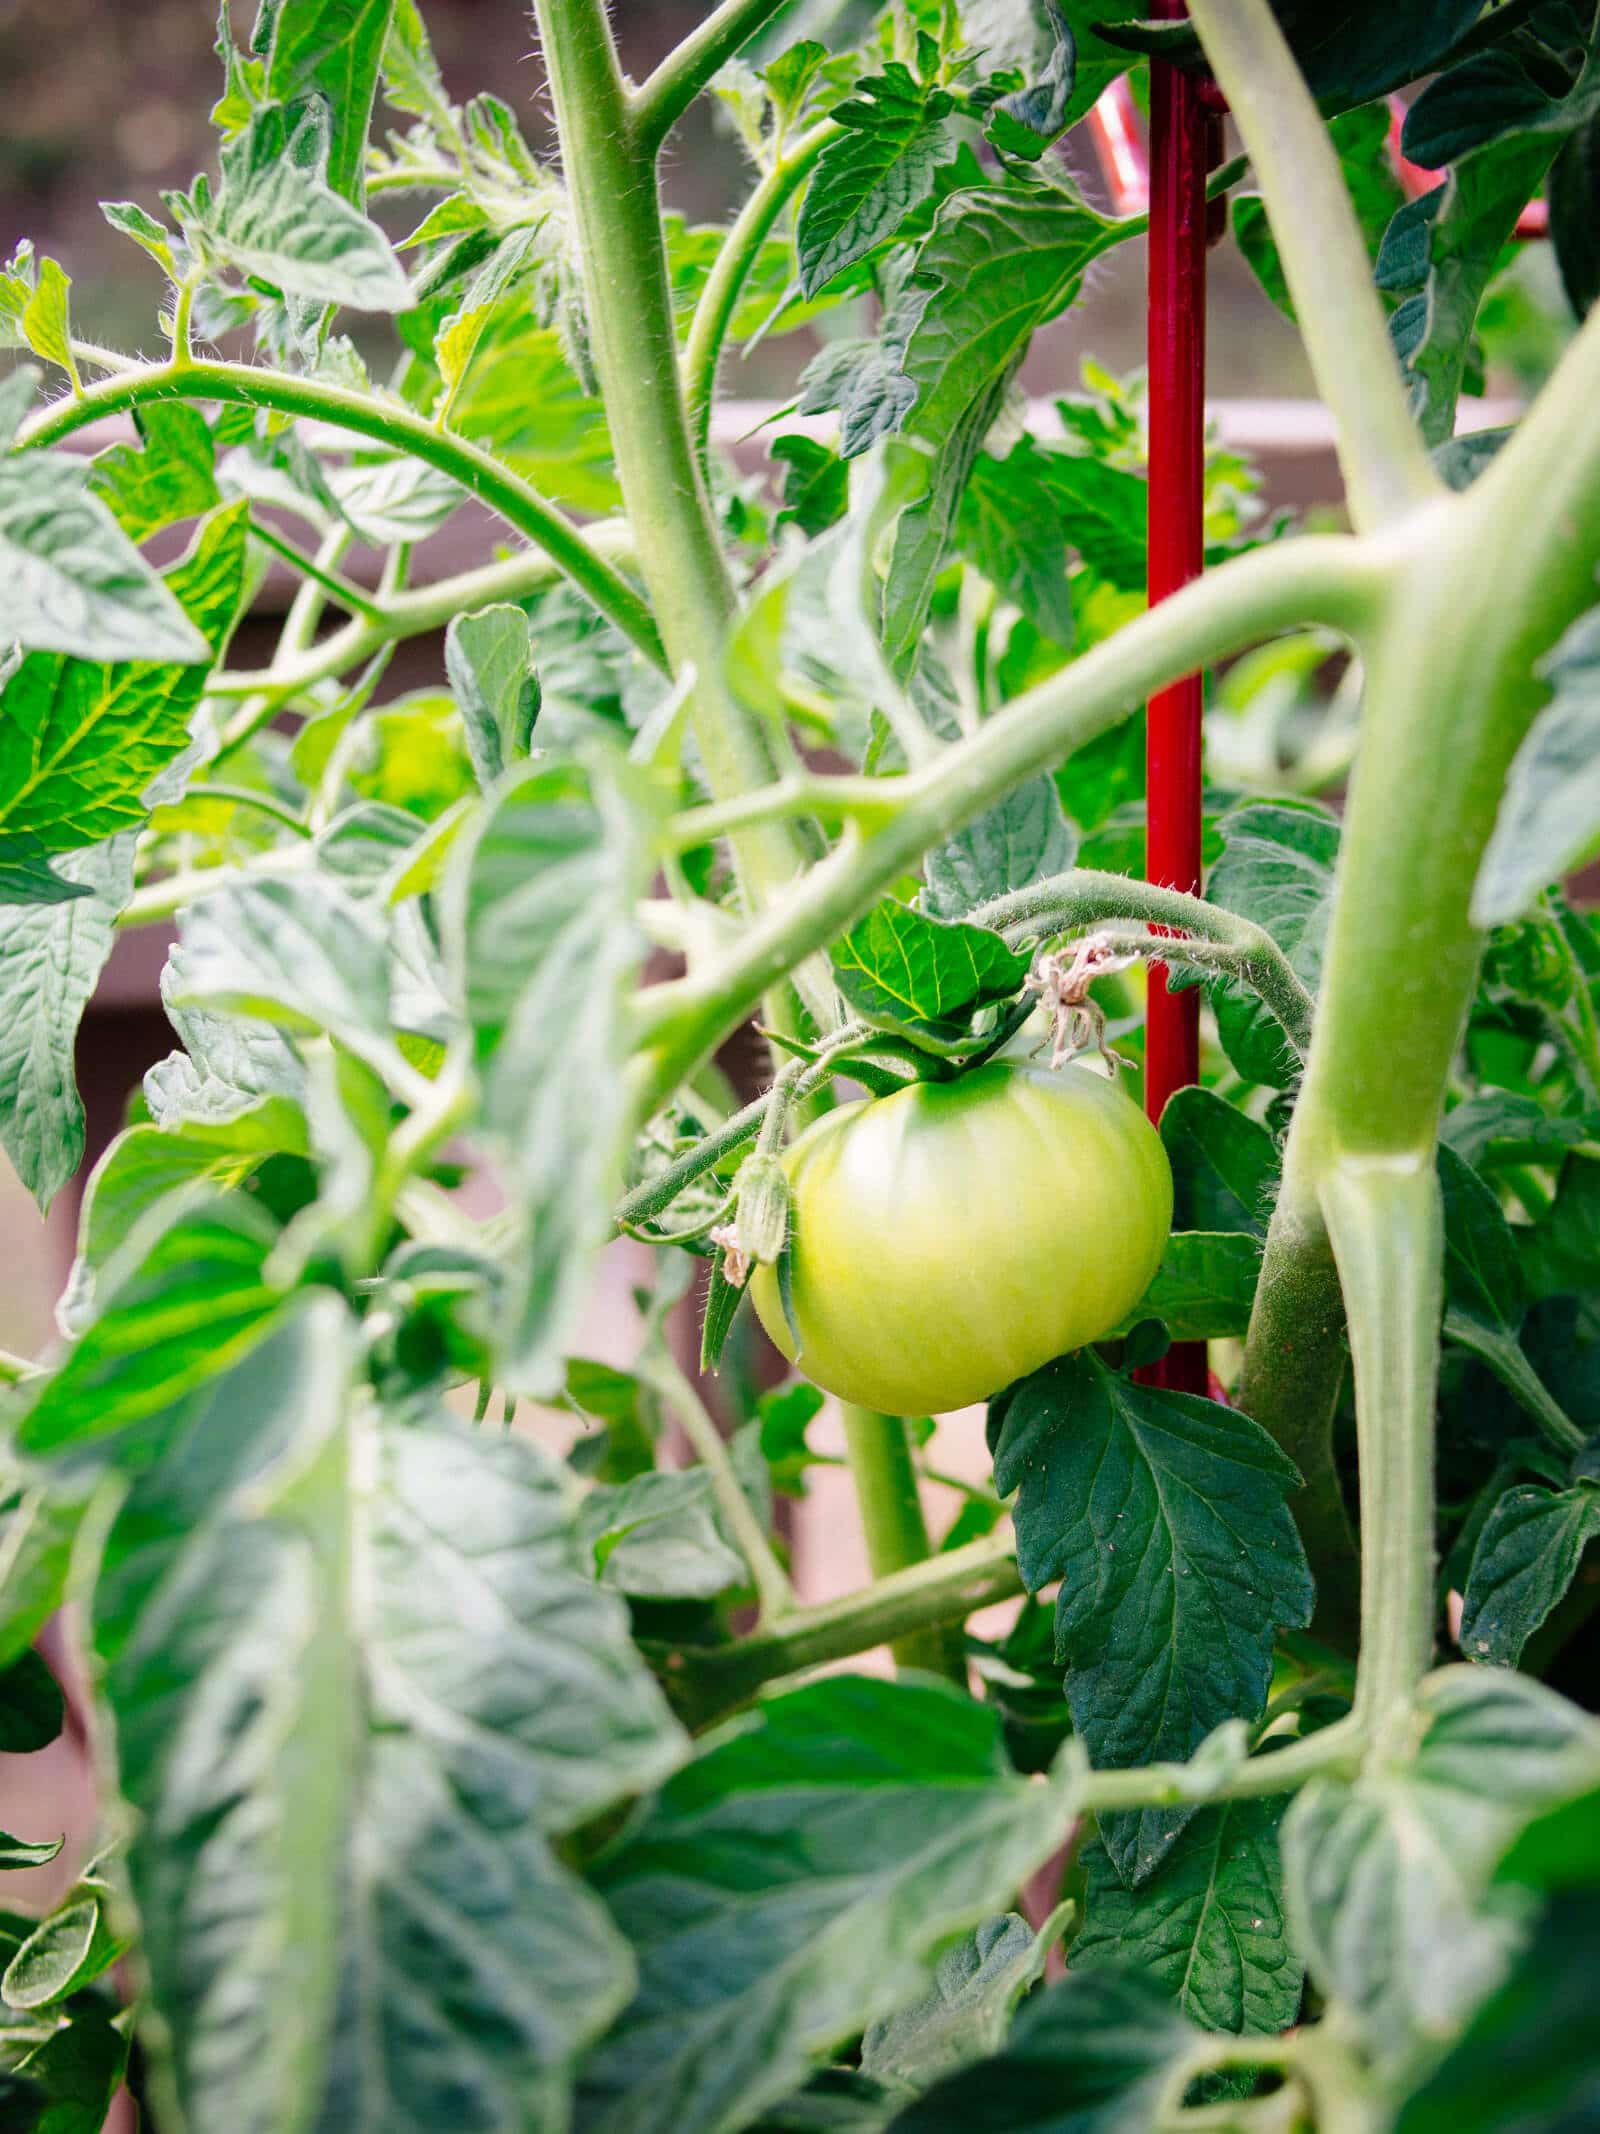 Grow indeterminate tomato plants in pots